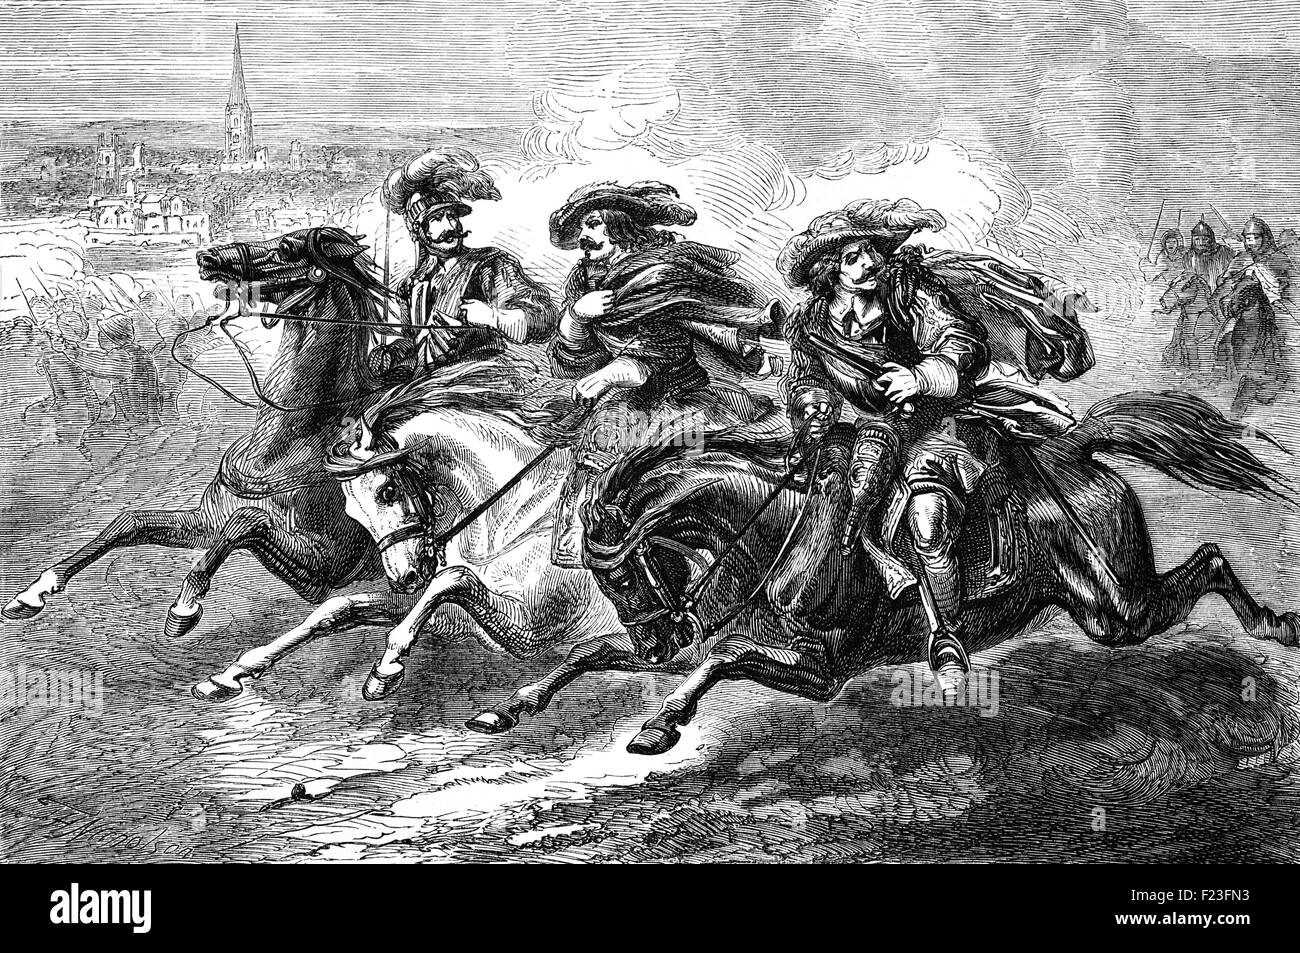 Cavaliers fleeing from the Battle of Naseby, the key battle of the first English Civil War. On 14 June 1645, the main royalist army of King Charles I was destroyed by the Parliamentarian New Model Army commanded by Sir Thomas Fairfax and Oliver Cromwell. Stock Photo